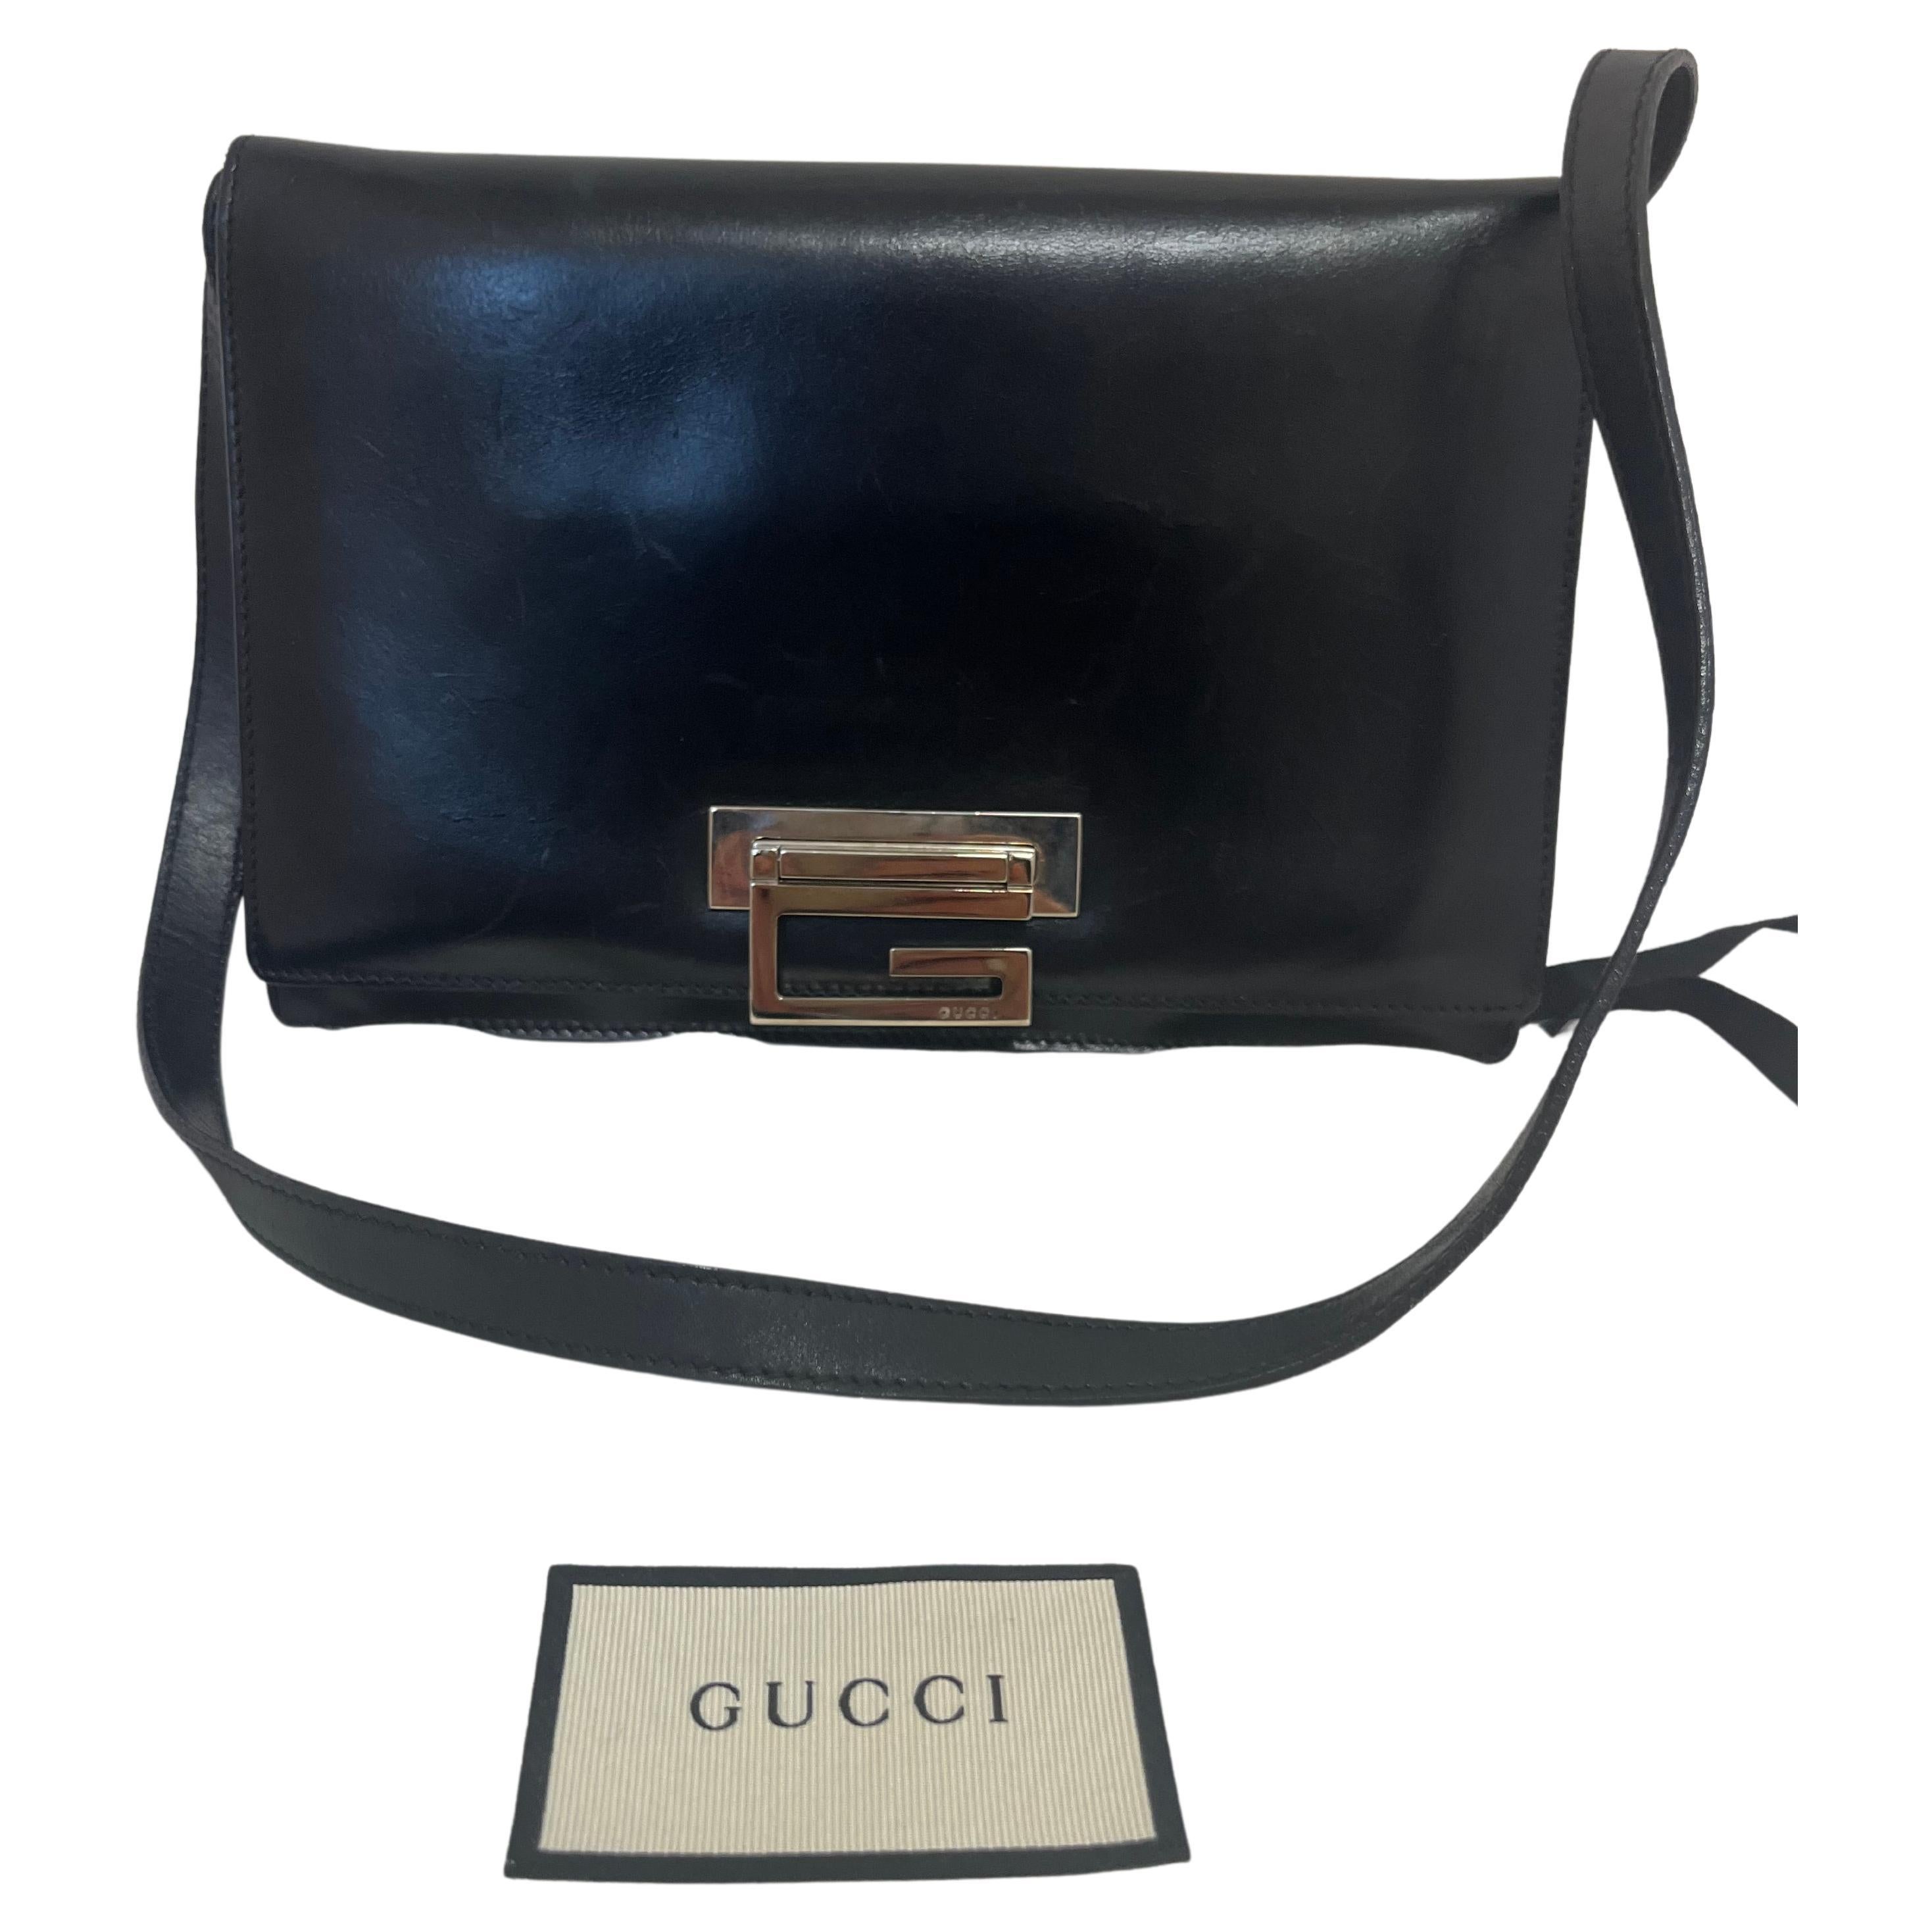 Buy 1950's Vintage Gucci Shoe Purse Dust Bag With Shopping Online